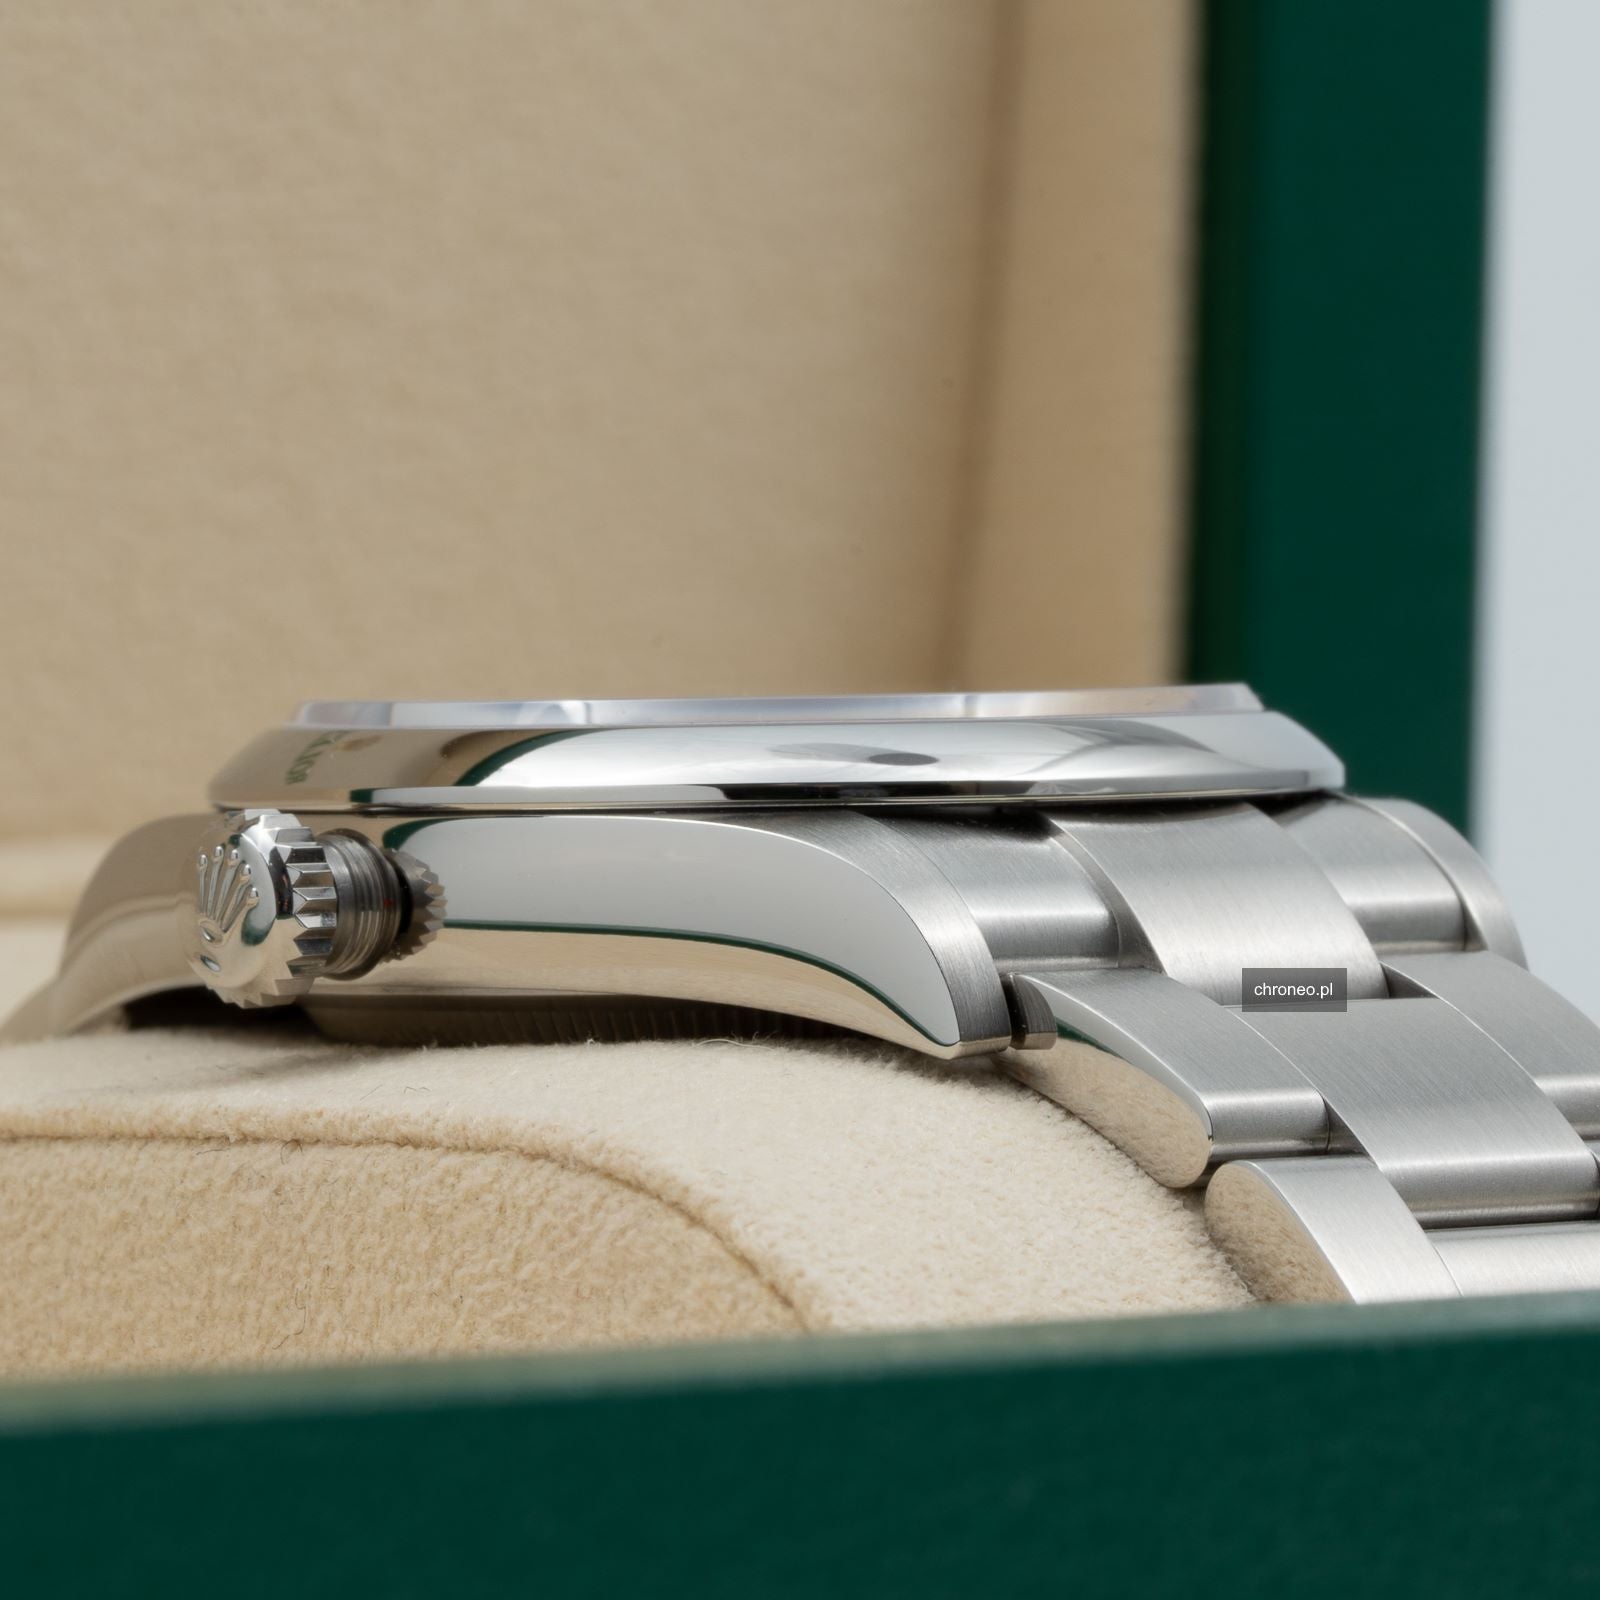 Rolex Oyster Perpetual 36 ref. 126000